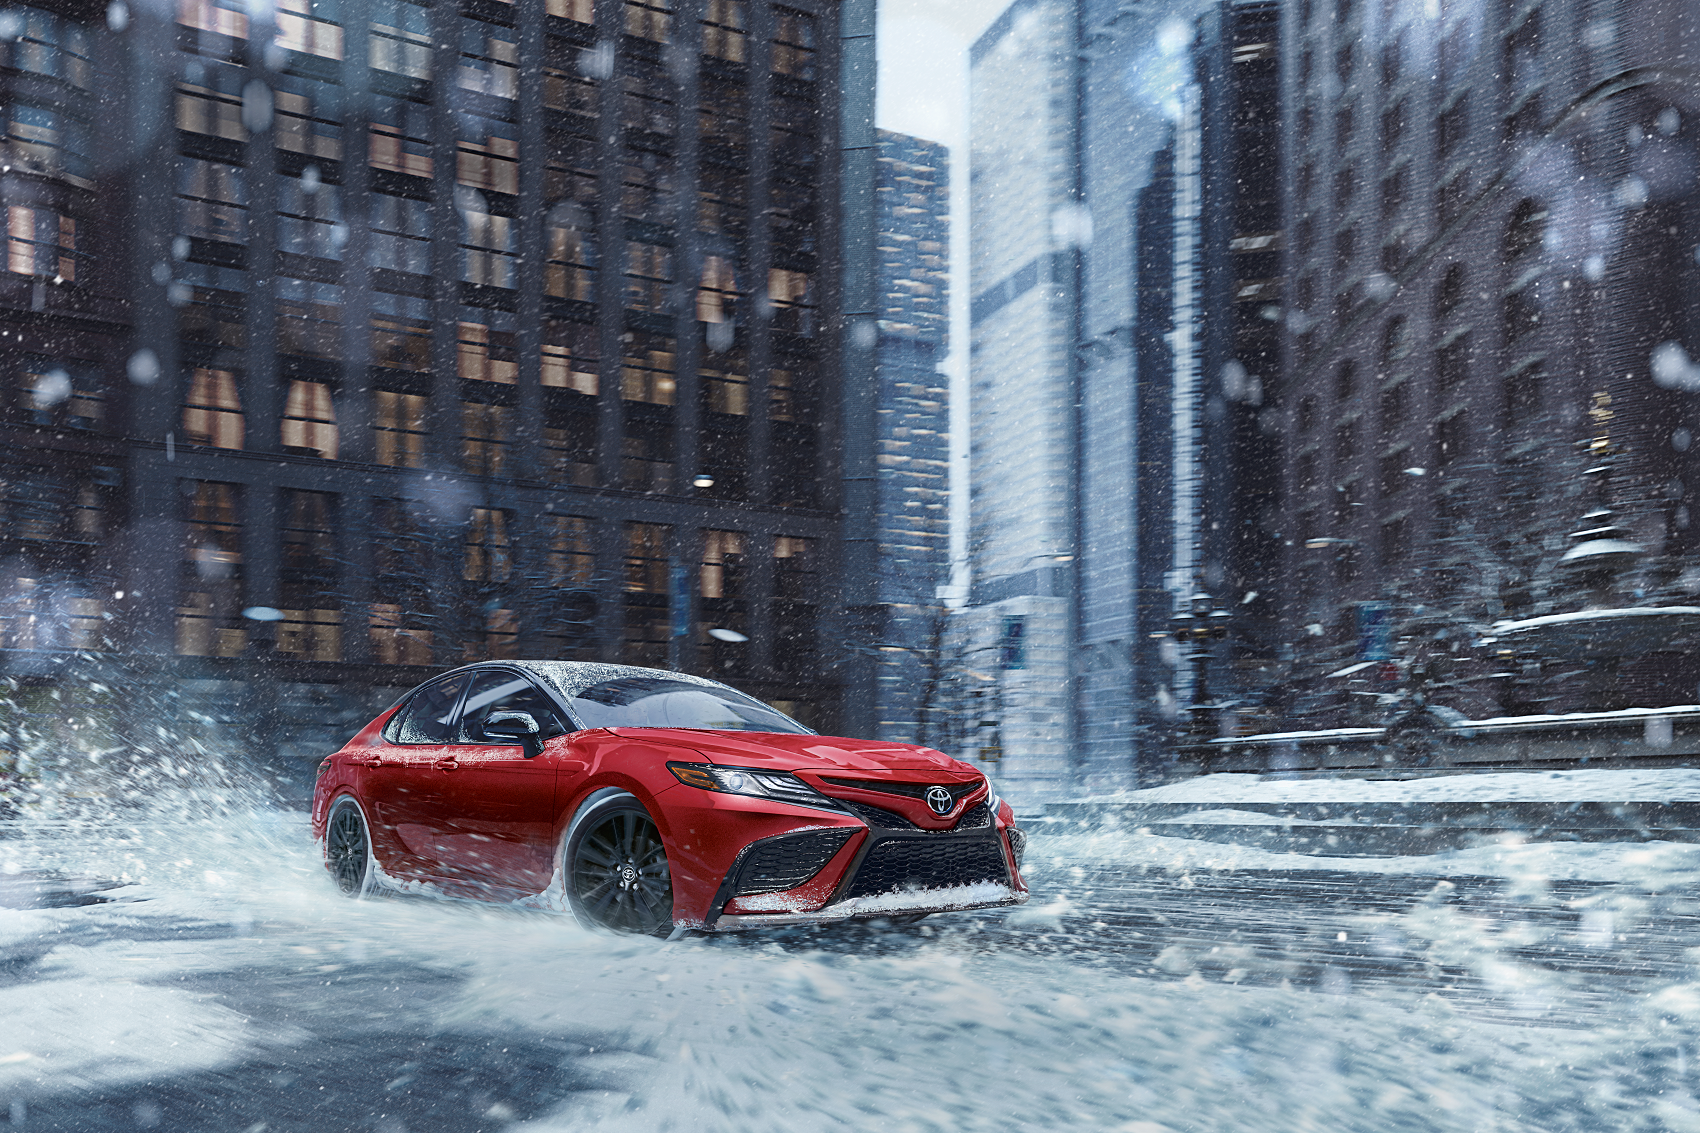 2021 Toyota Camry Review Avon IN
